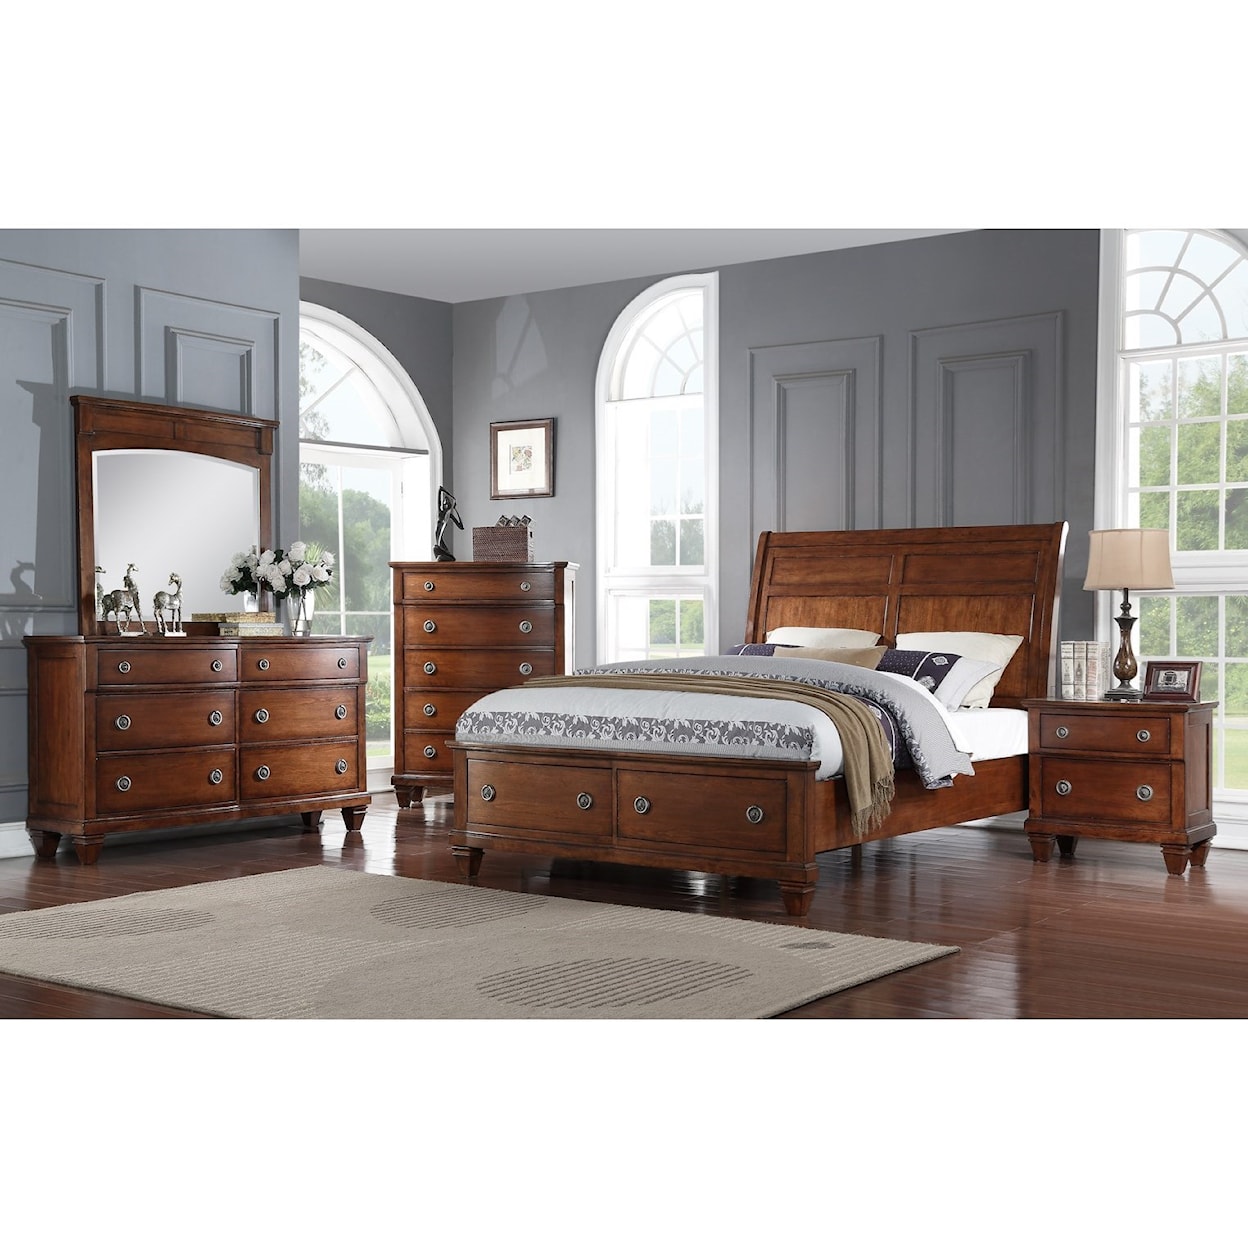 Avalon Furniture B068 King Storage Bed with Sleigh Headboard